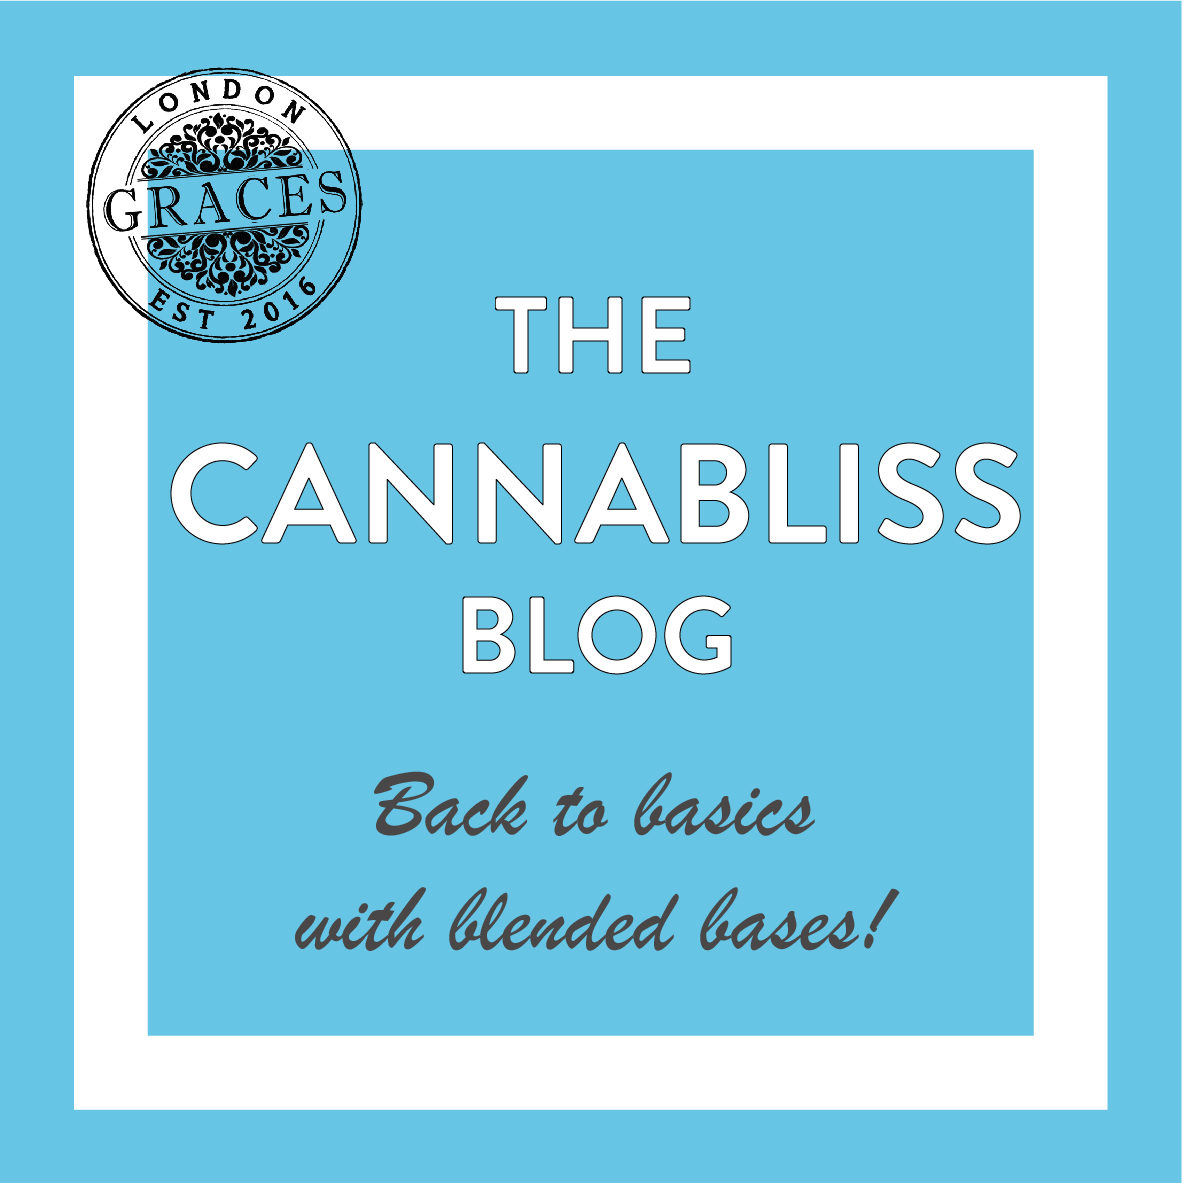 Cannabliss - Back to basics with blended bases